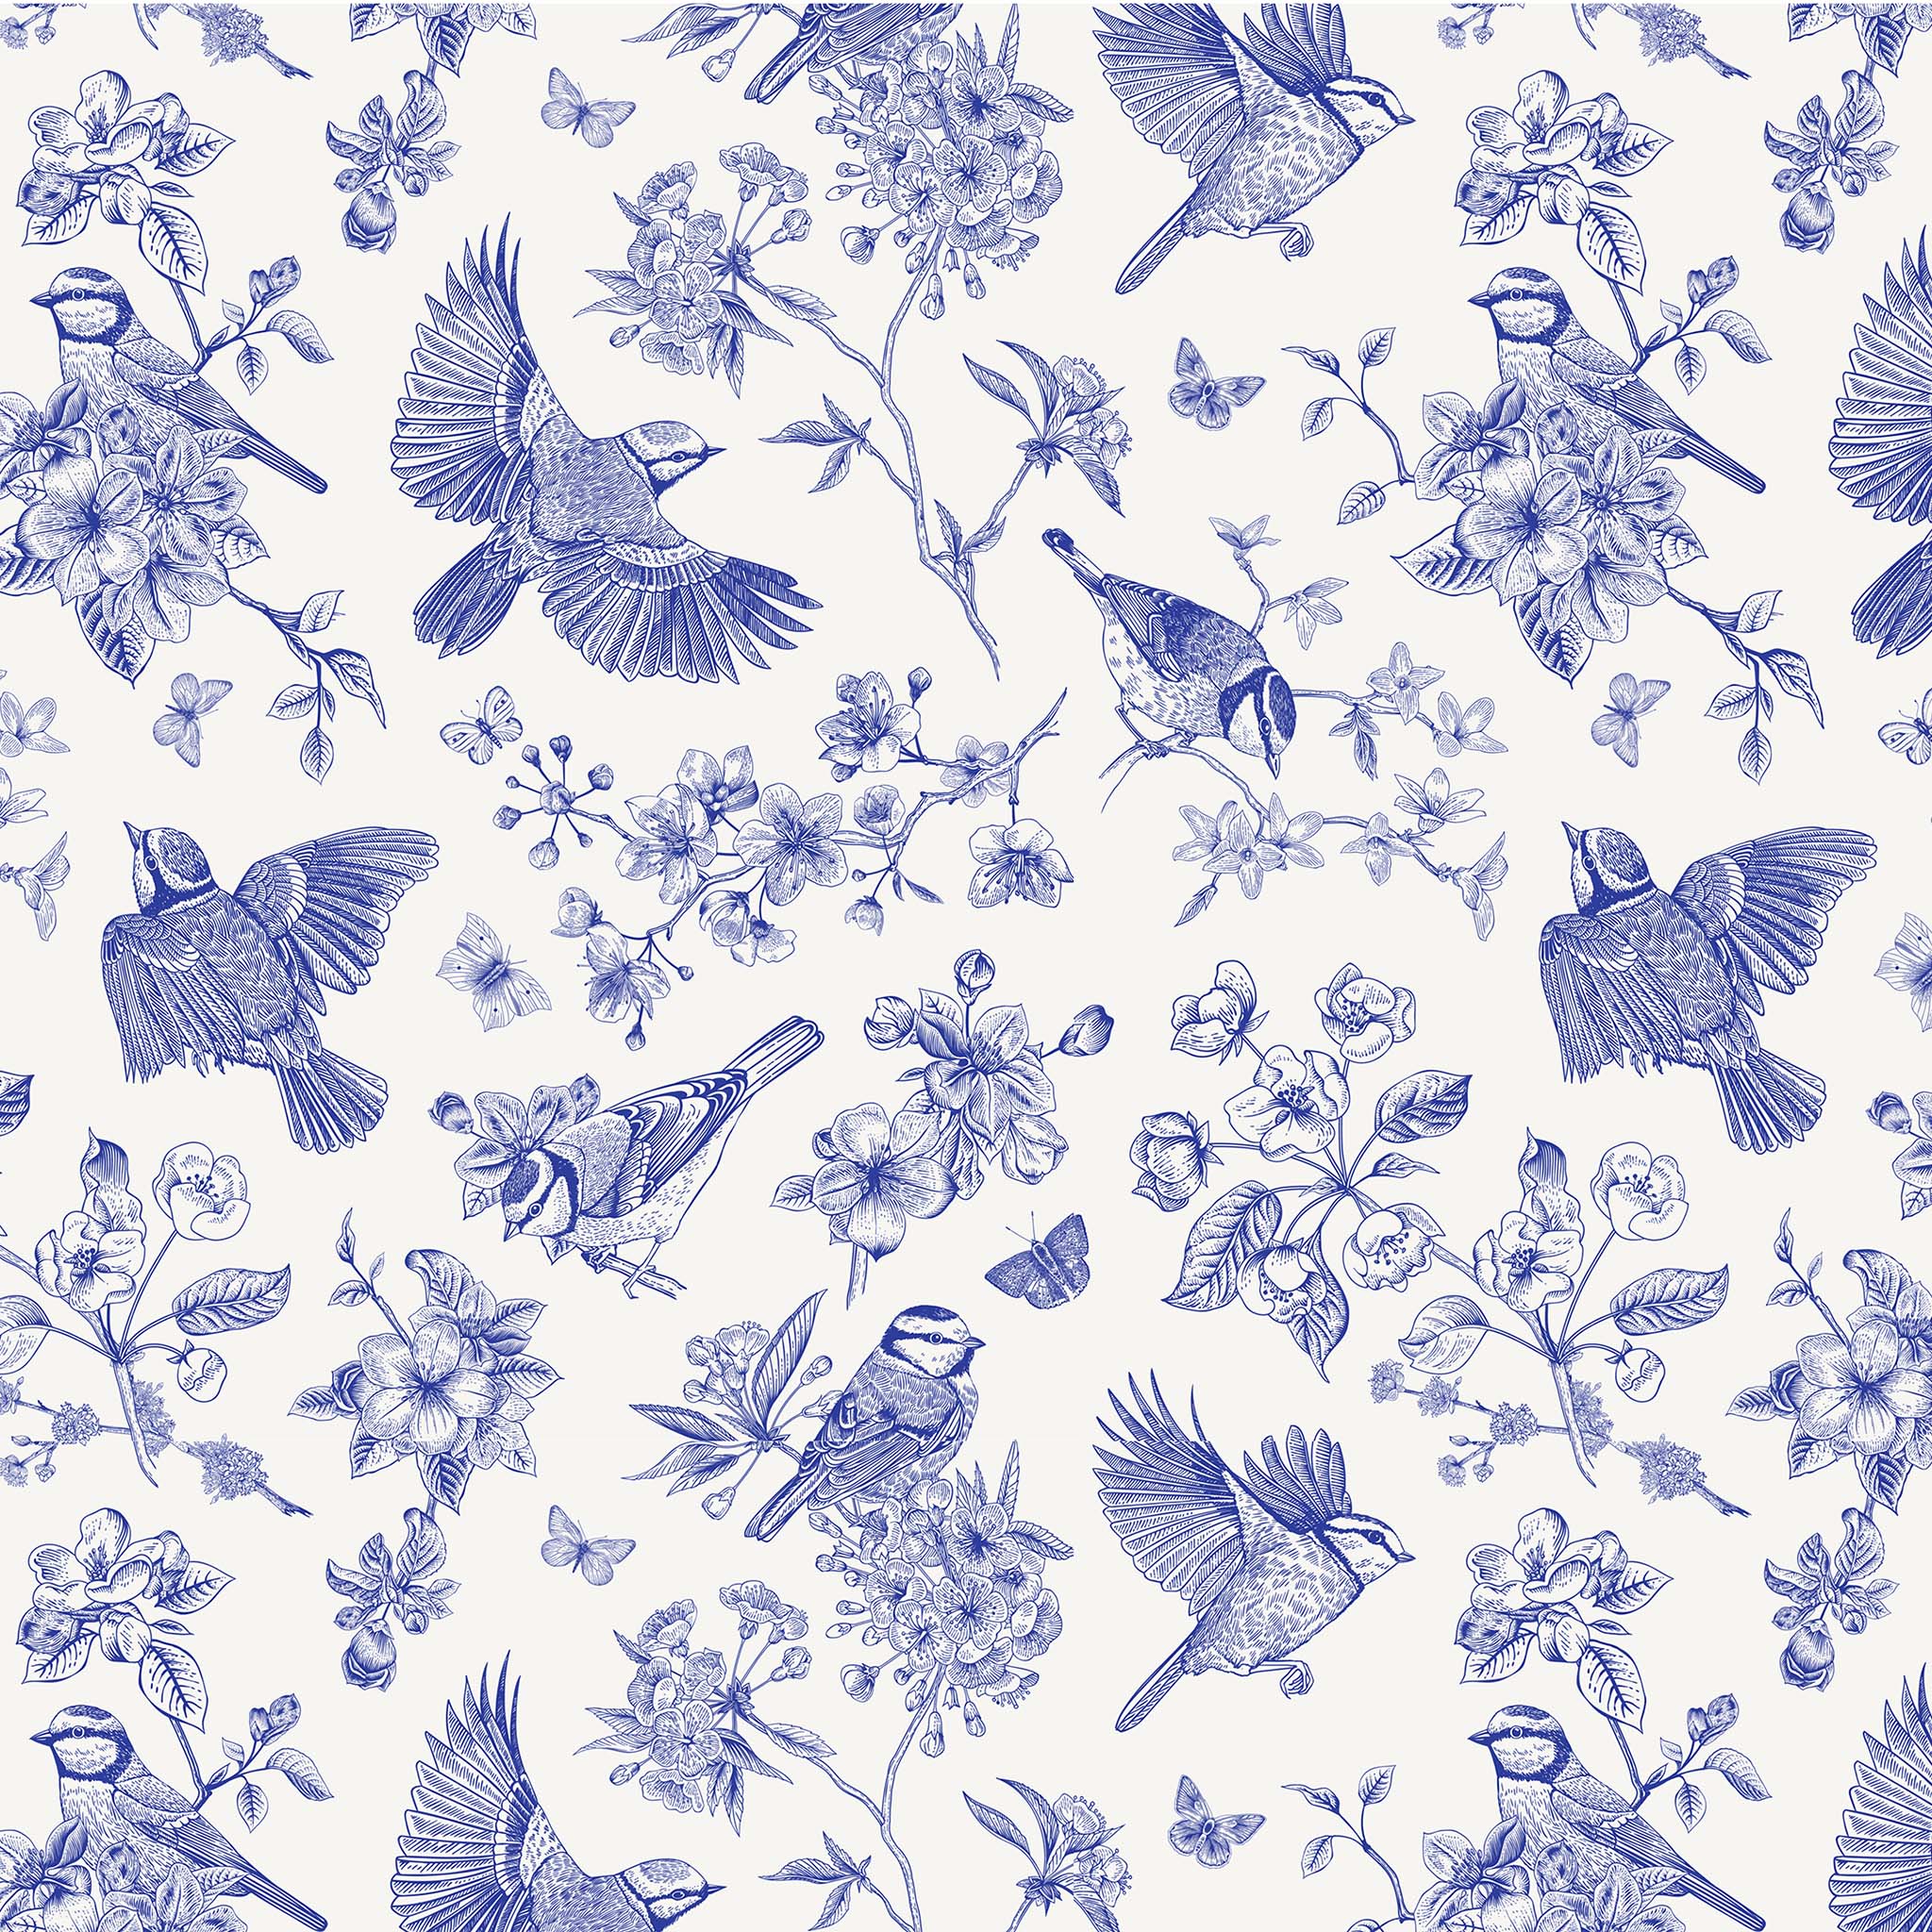 Close-up of a tissue paper design that features a playful blue and white Delft style print, depicting birds in flight and resting on branches with floral accents.